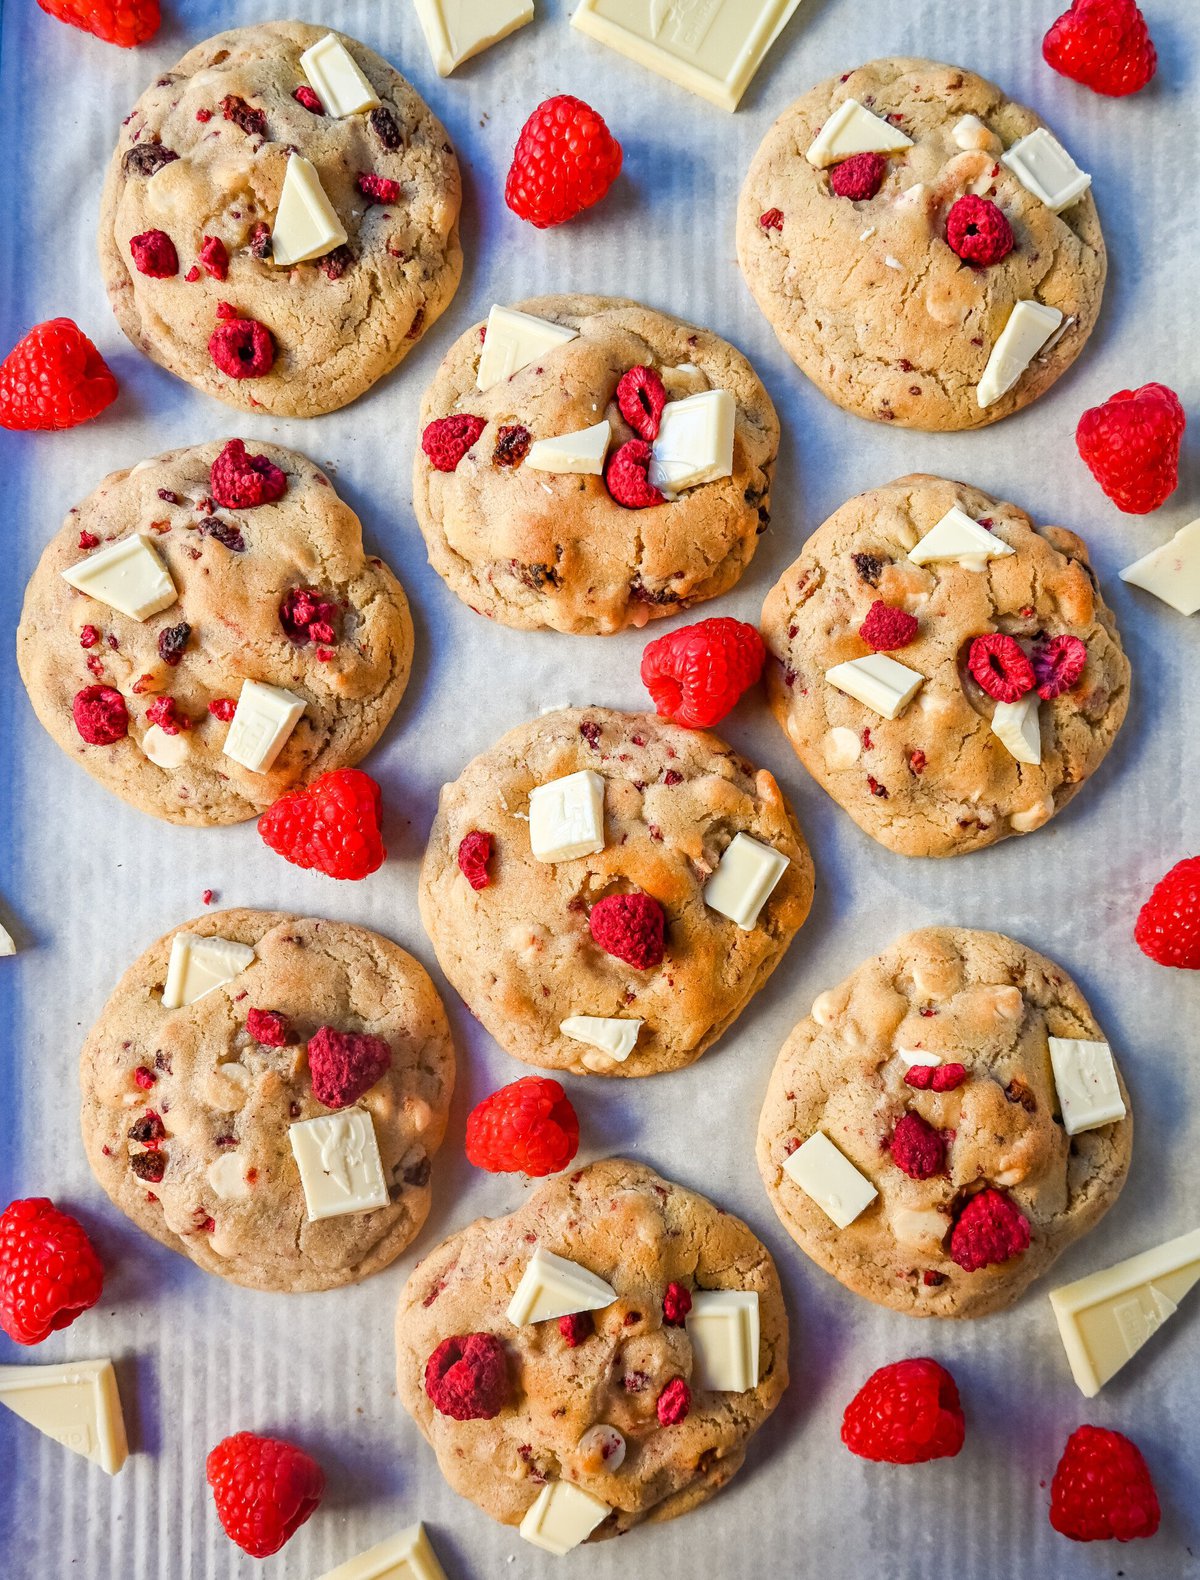 White Chocolate Raspberry Cookies. Soft and chewy raspberry white chocolate cookies made with freeze dried raspberries and creamy white chocolate. These are the best bakery-style white chocolate raspberry cookies!